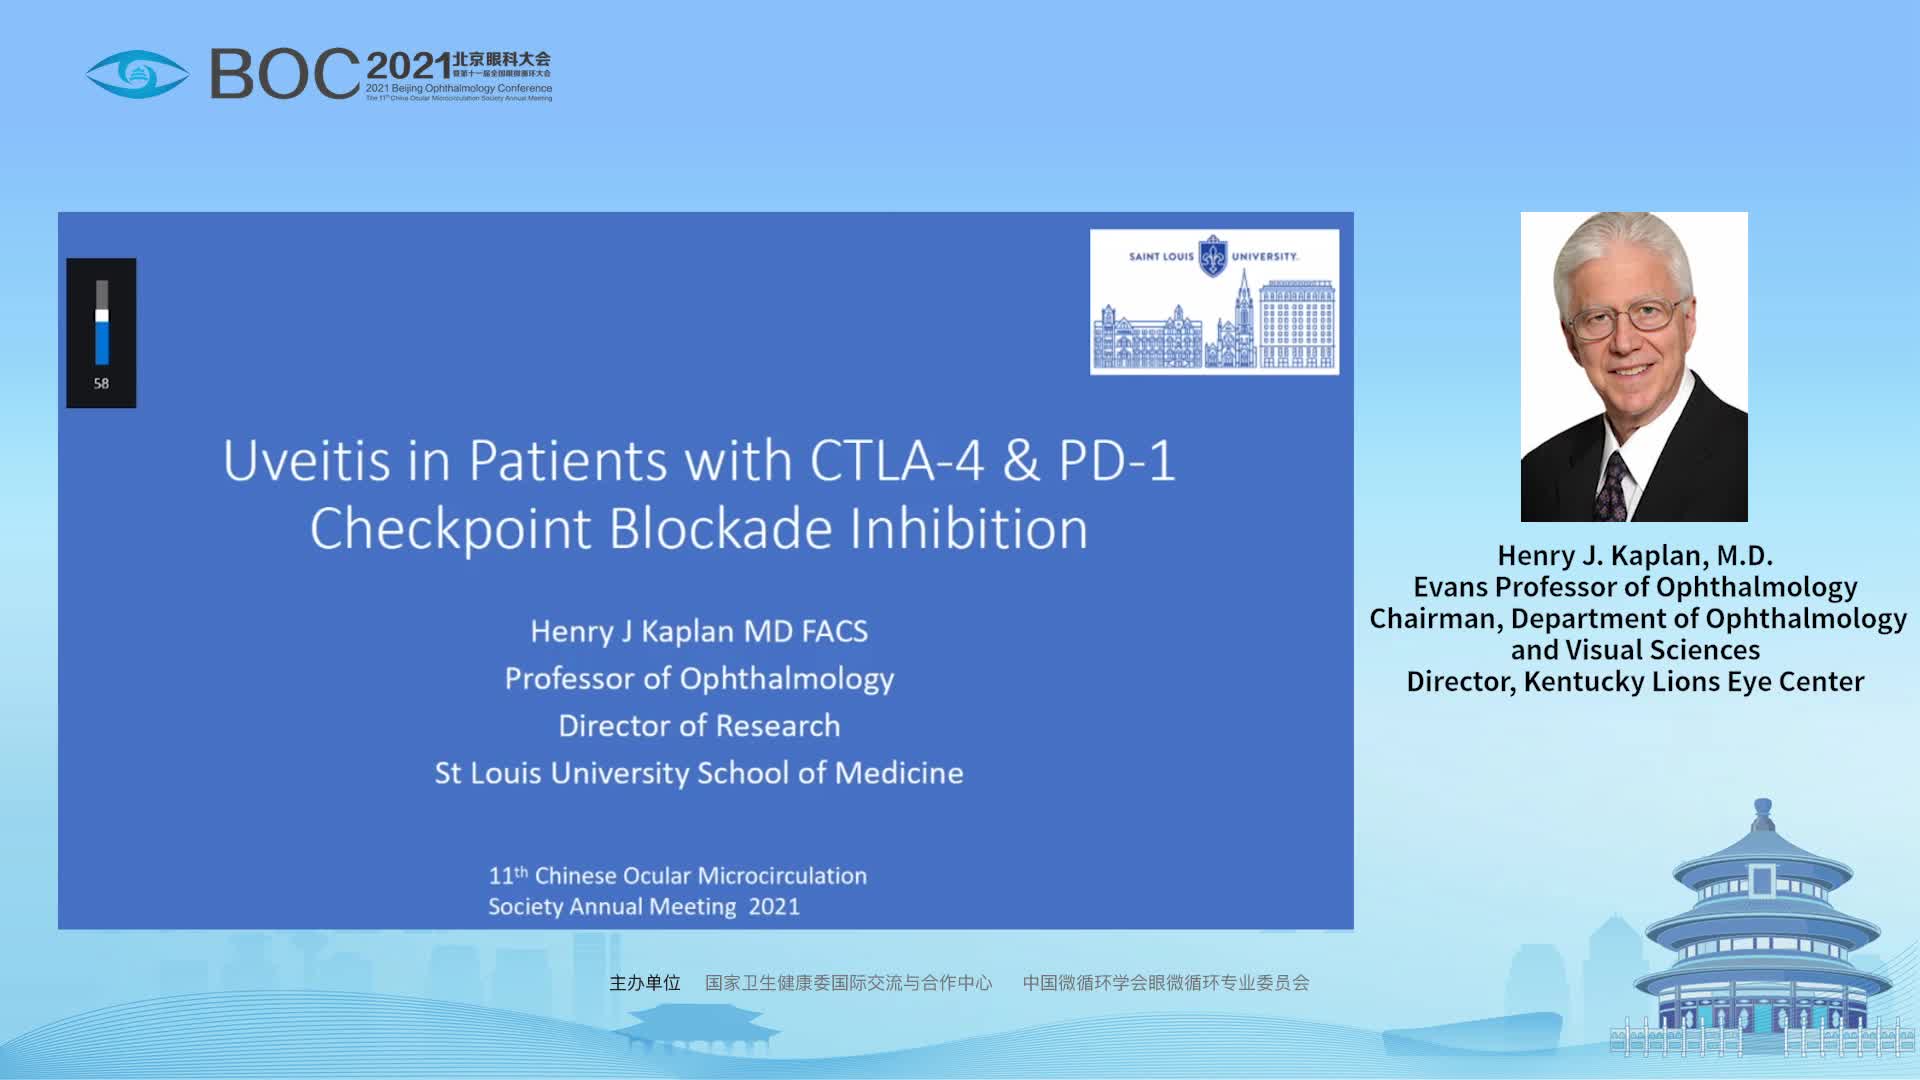 Uveitis in Patients with Checkpoint Blockade Inhibition